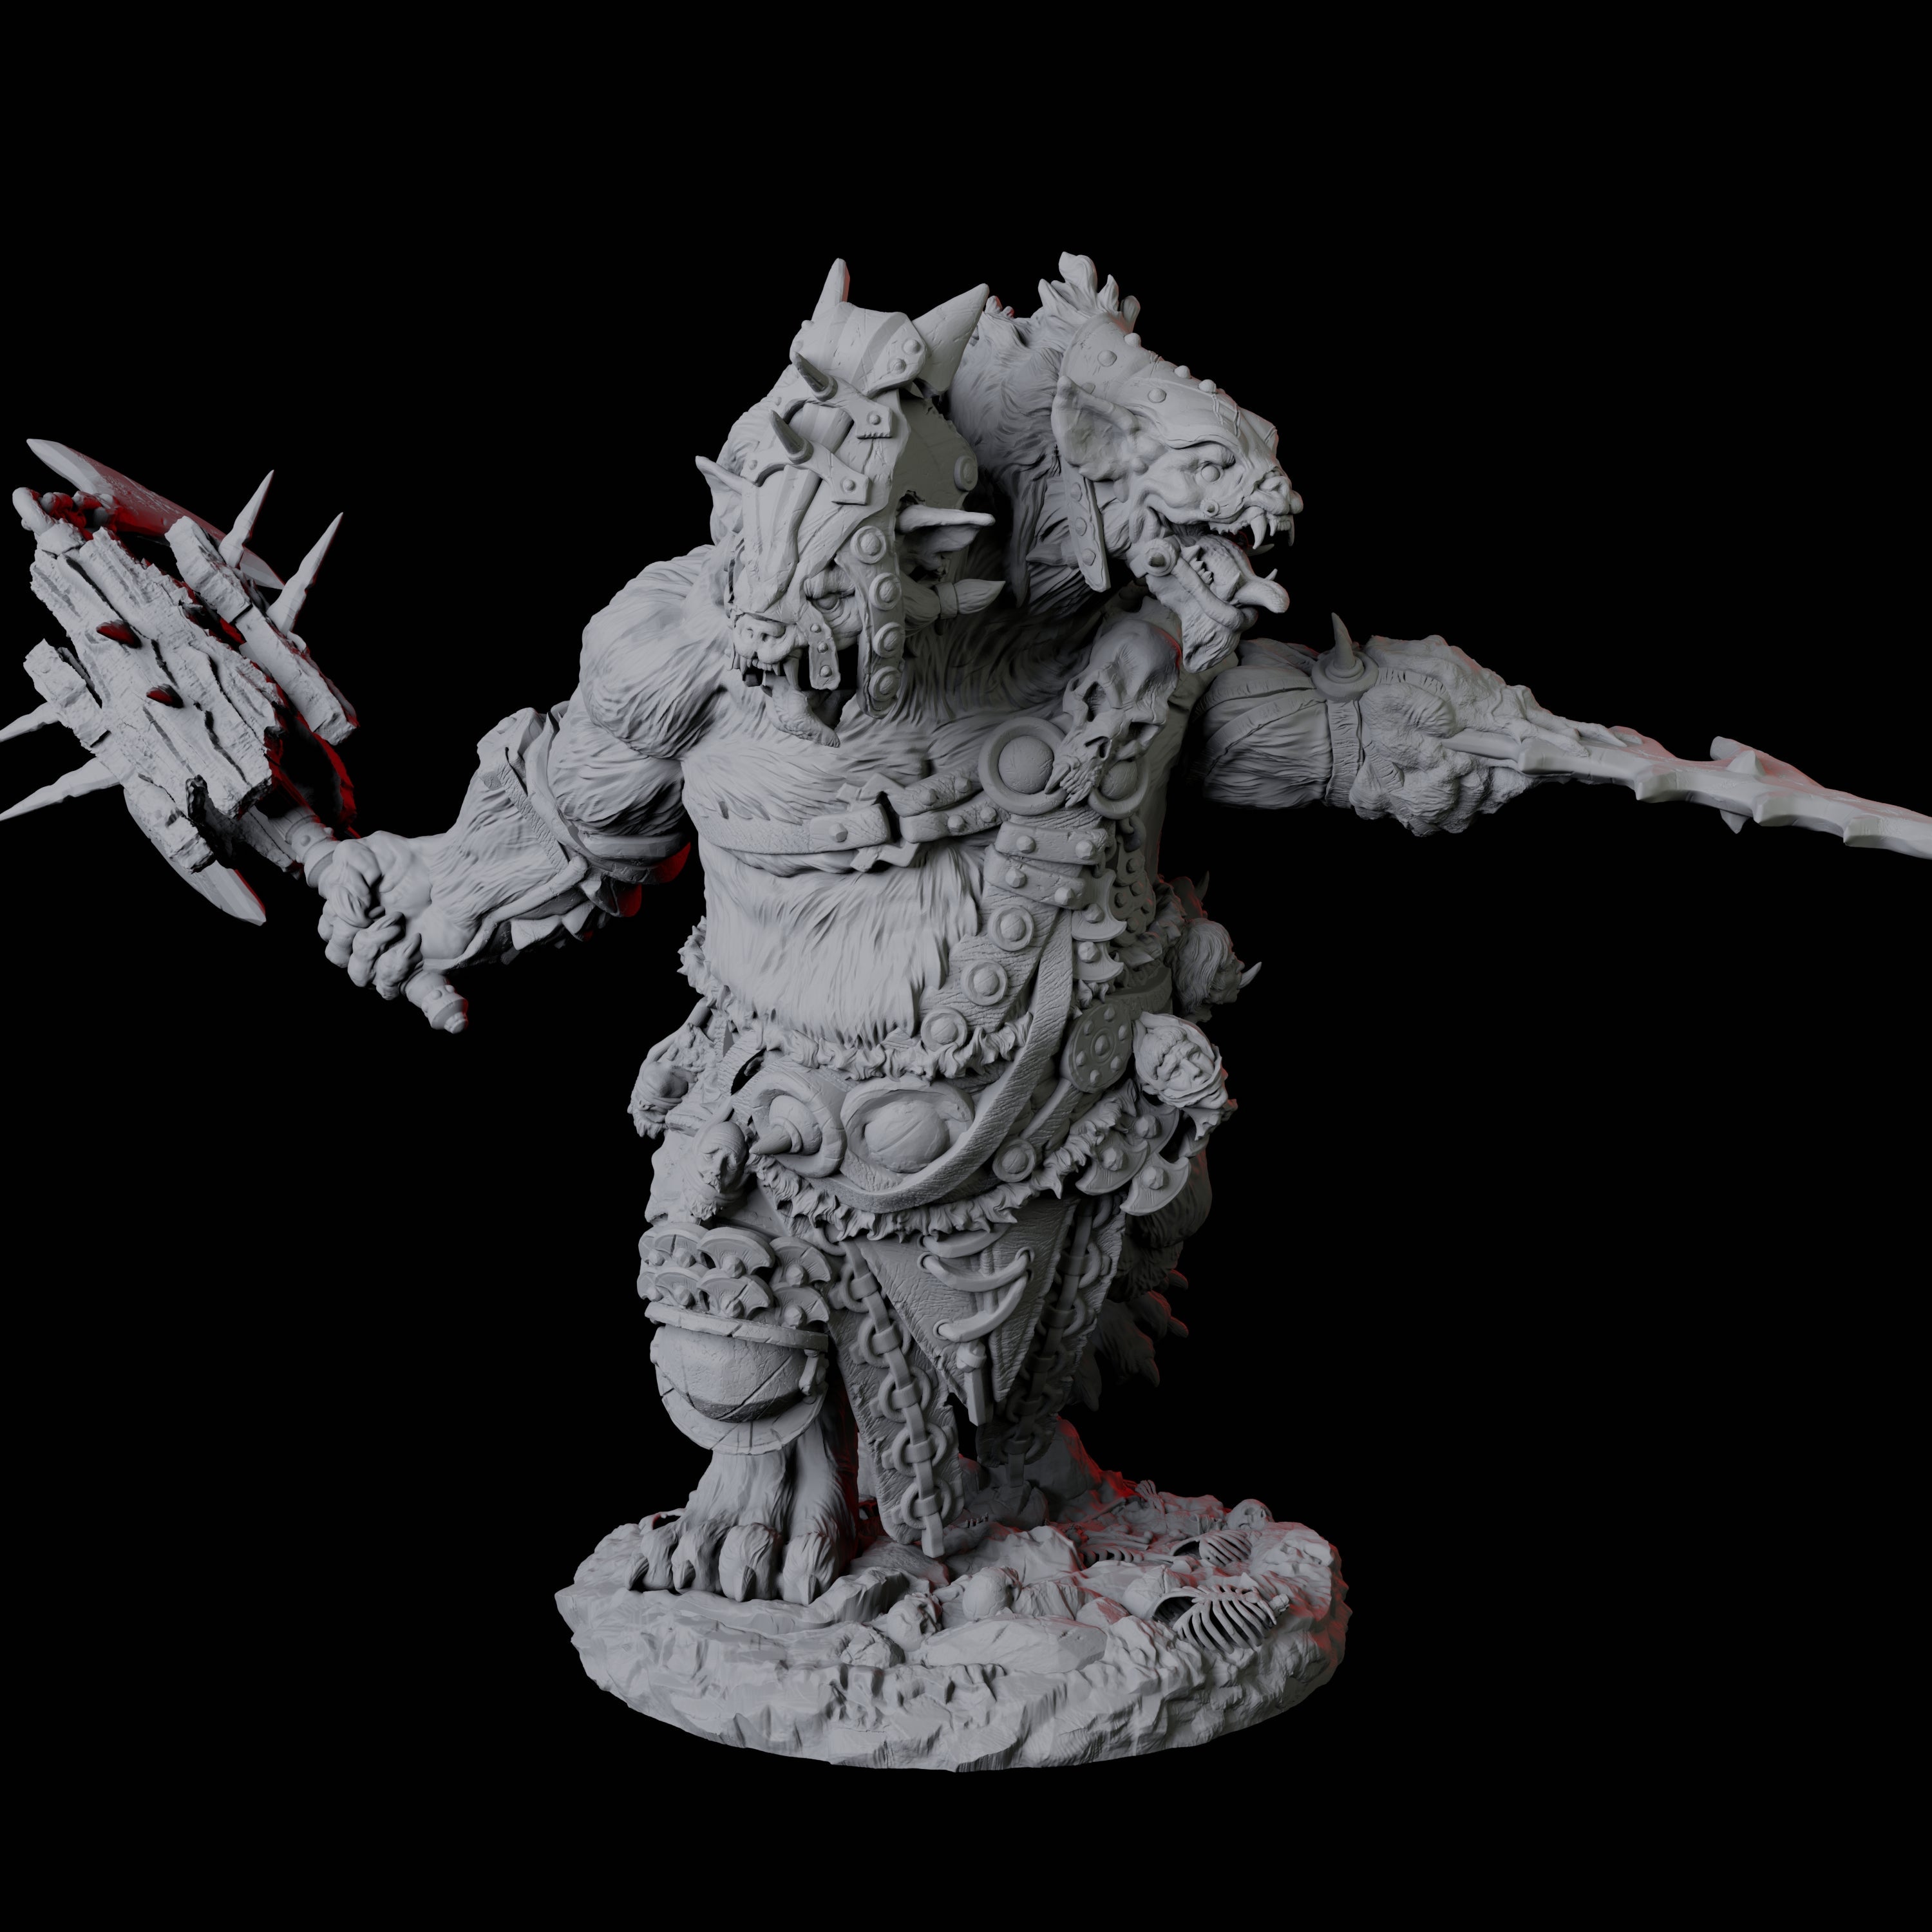 Gnoll Ettin B Miniature for Dungeons and Dragons, Pathfinder or other TTRPGs